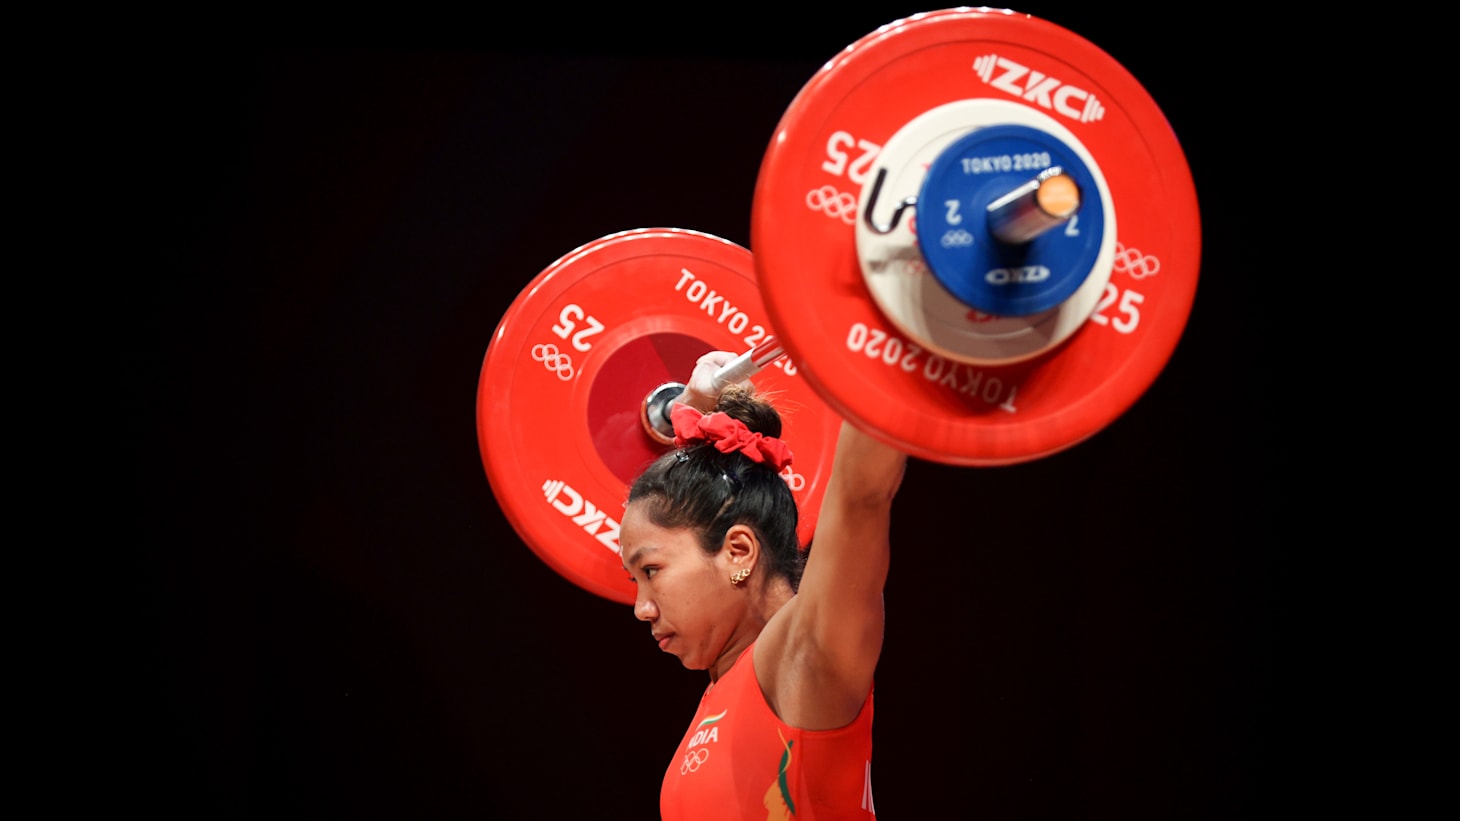 weightlifting cwg 2022 live